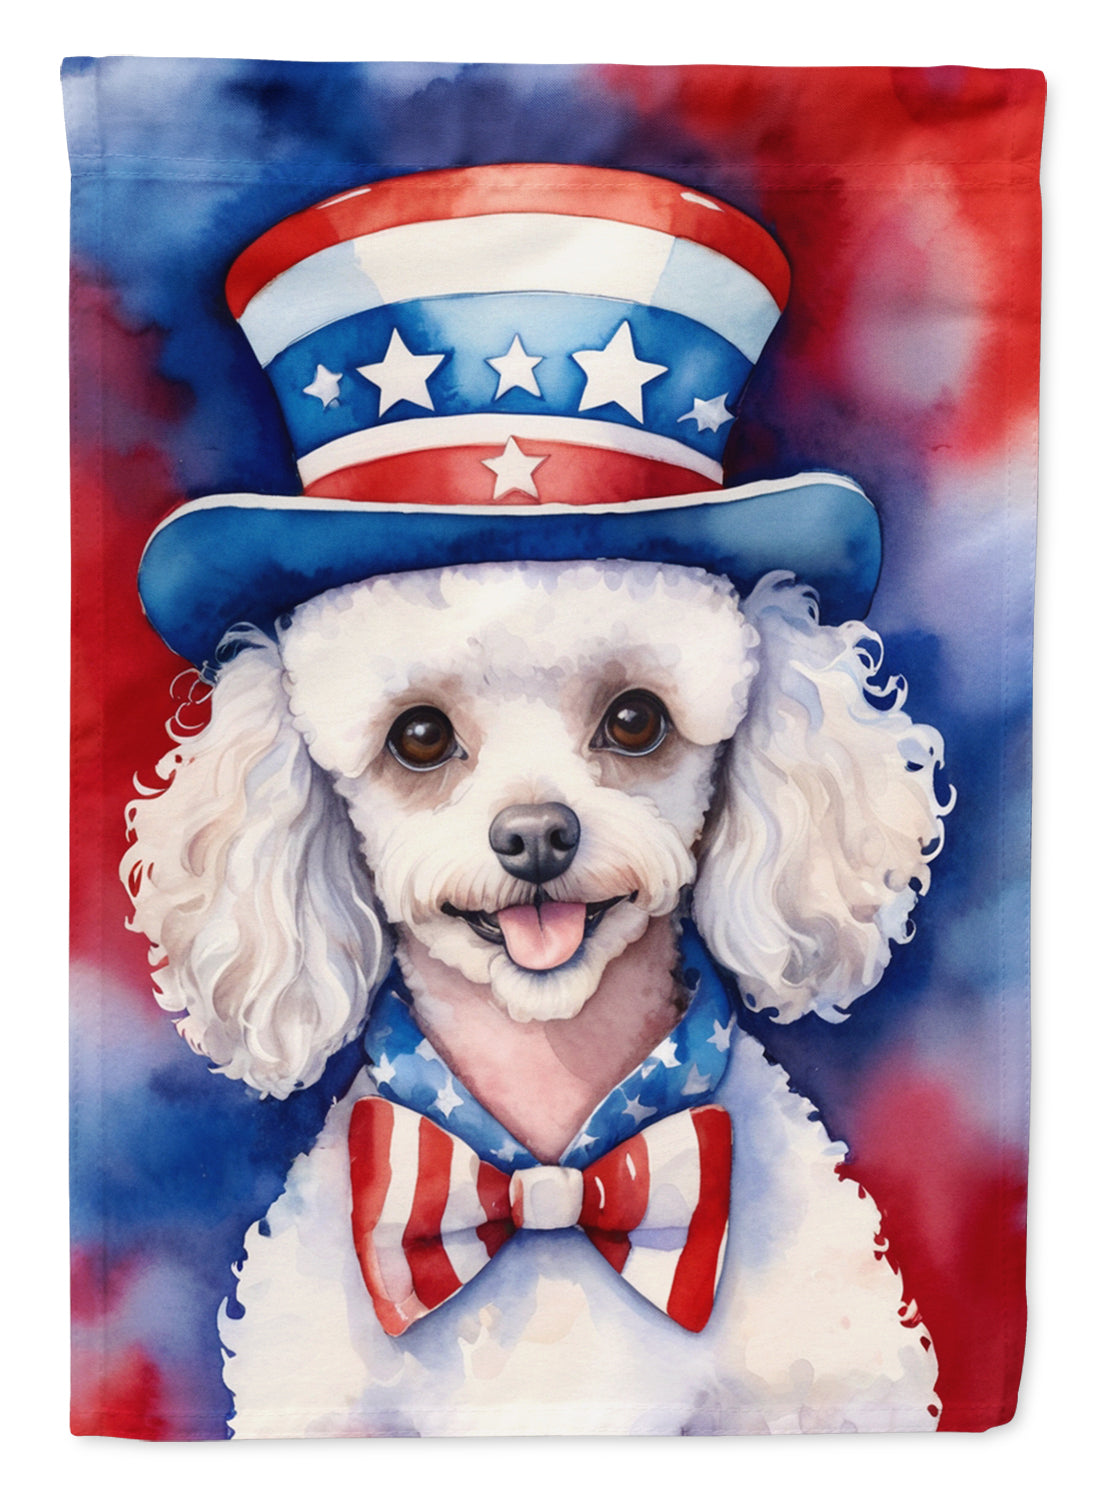 Buy this White Poodle Patriotic American Garden Flag